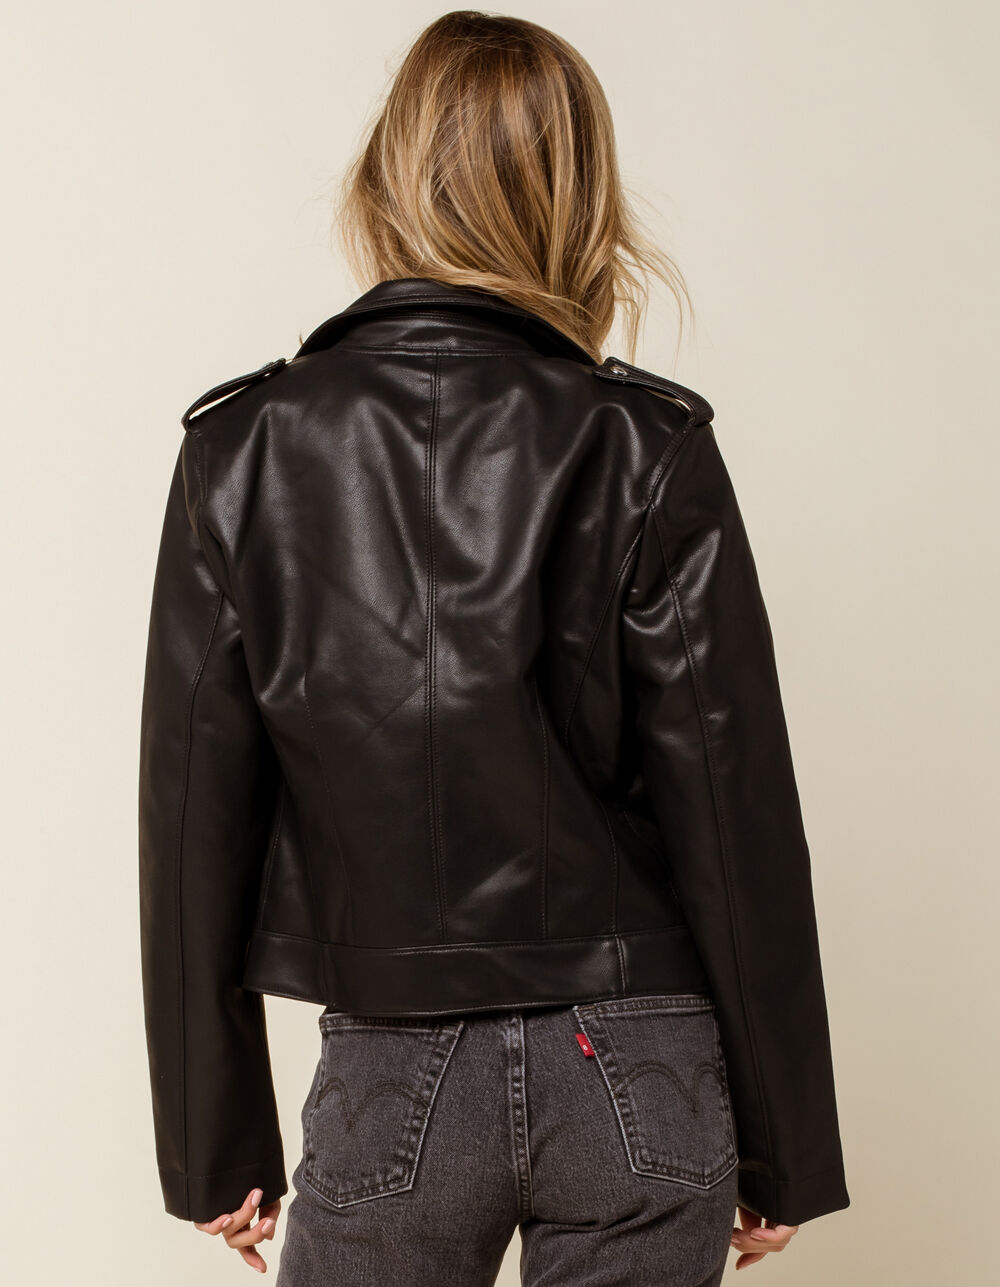 BLANK NYC In Plain Sight Womens Moto Jacket image number 2